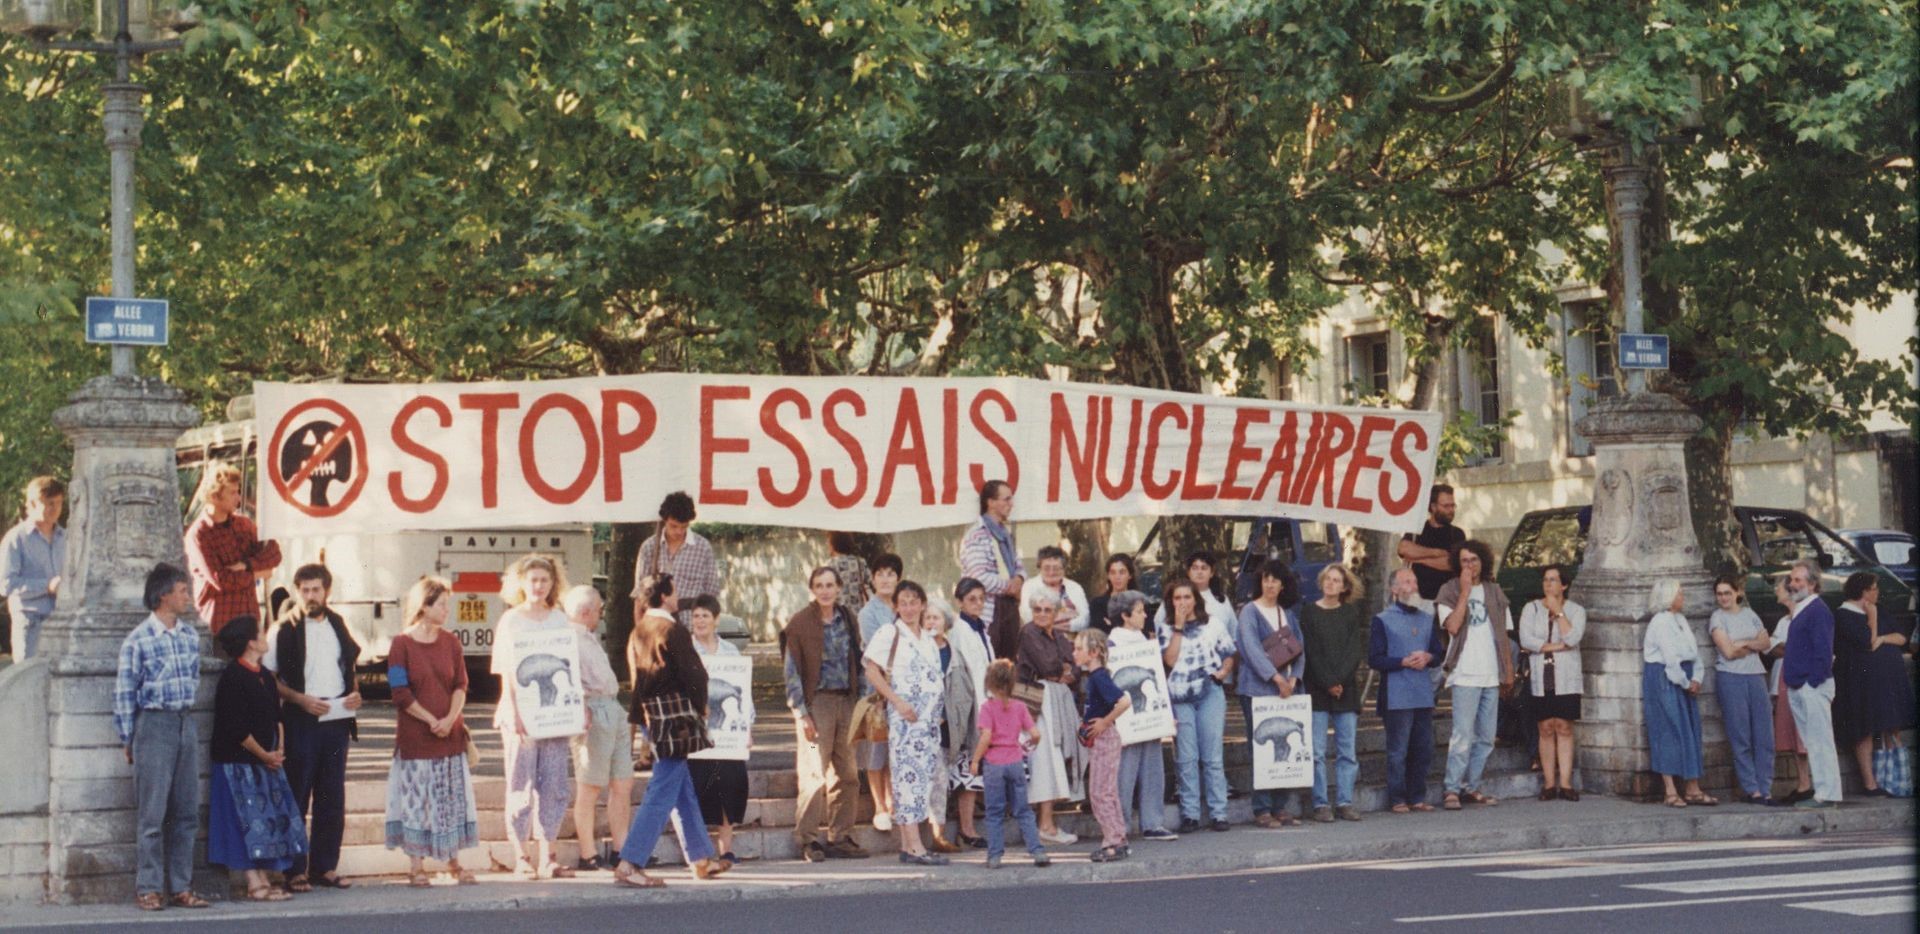 Anti-nuclear demonstration, France, 1980s